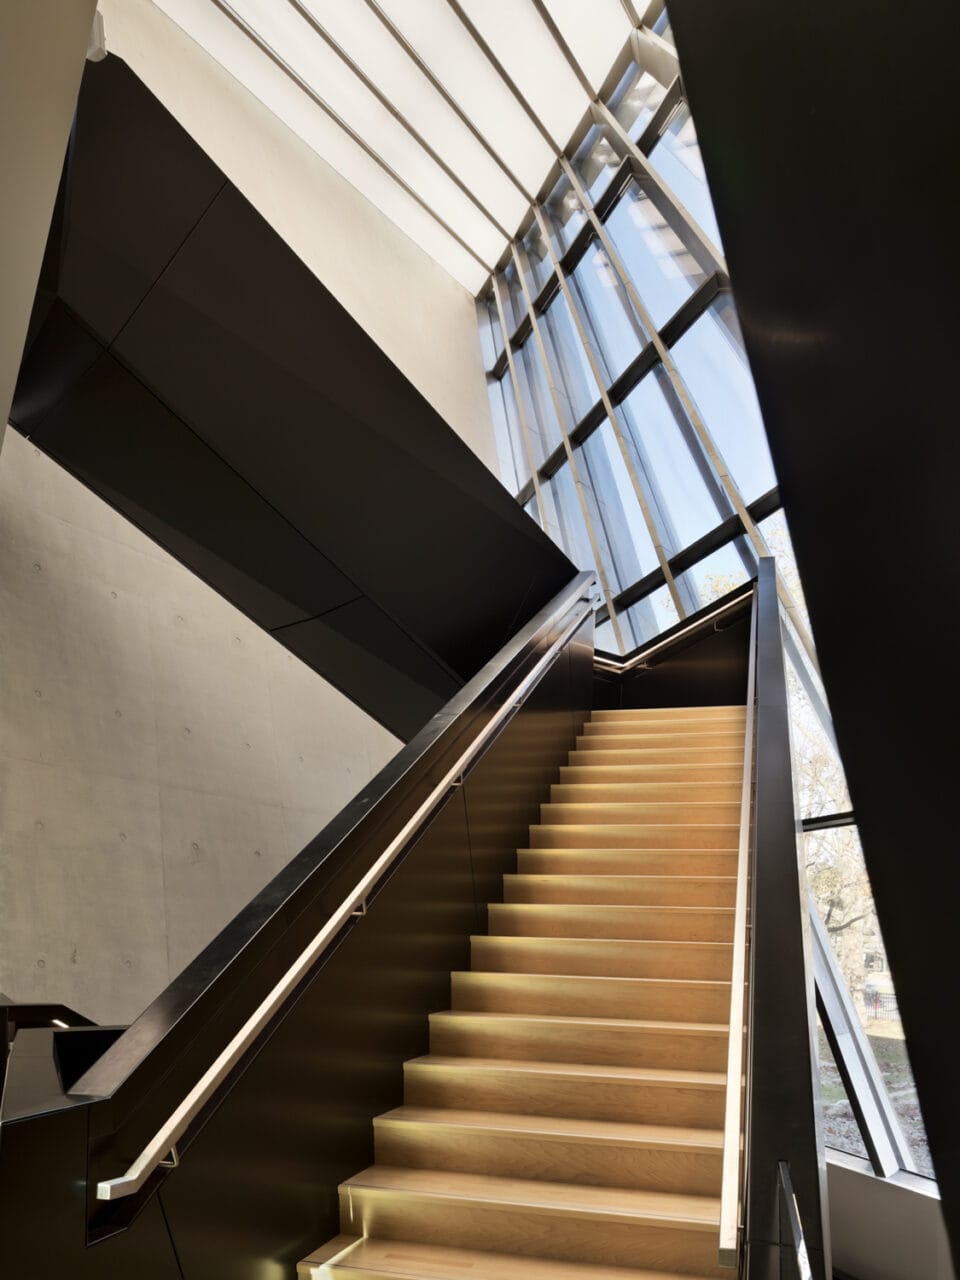 Image of stairwell at Broad Art Museum in Lansing, Michigan. Zaha Hadid Architects, architectural wall system by Riverside Group. Photo by Paul Warchol.